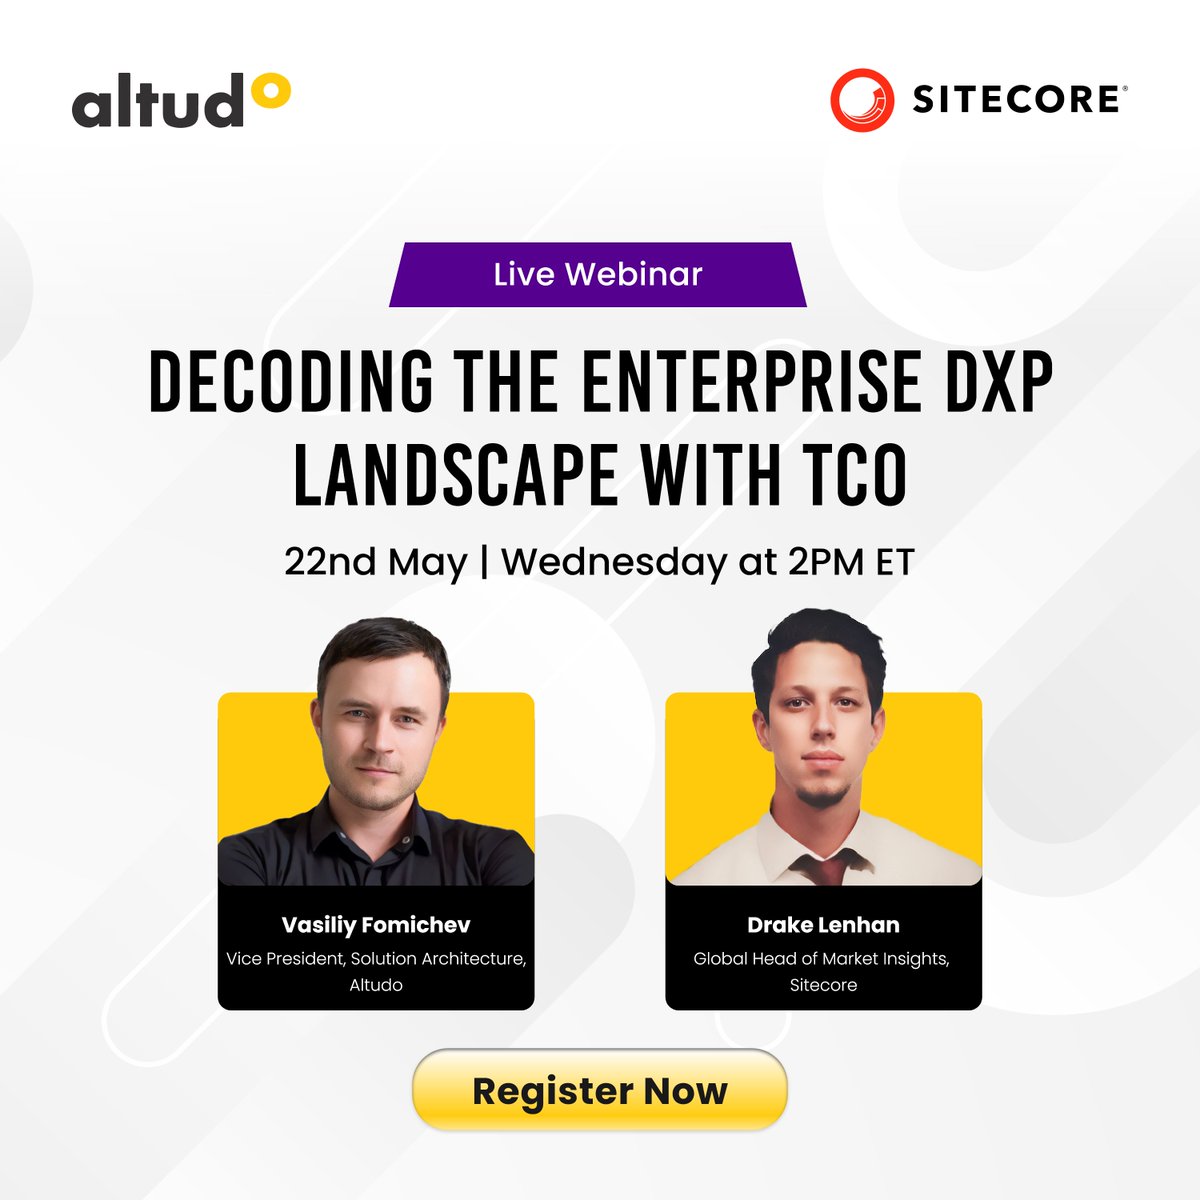 Struggling to choose the best #DXP for your business? Join our webinar &explore how to select the enterprise-level DXP, calculate the Total Cost of Ownership & catch up on DXP trends. Register now: altudo.co/insights/webin…

#DXP #Sitecore #SitecorePartner #AltudoWebinars